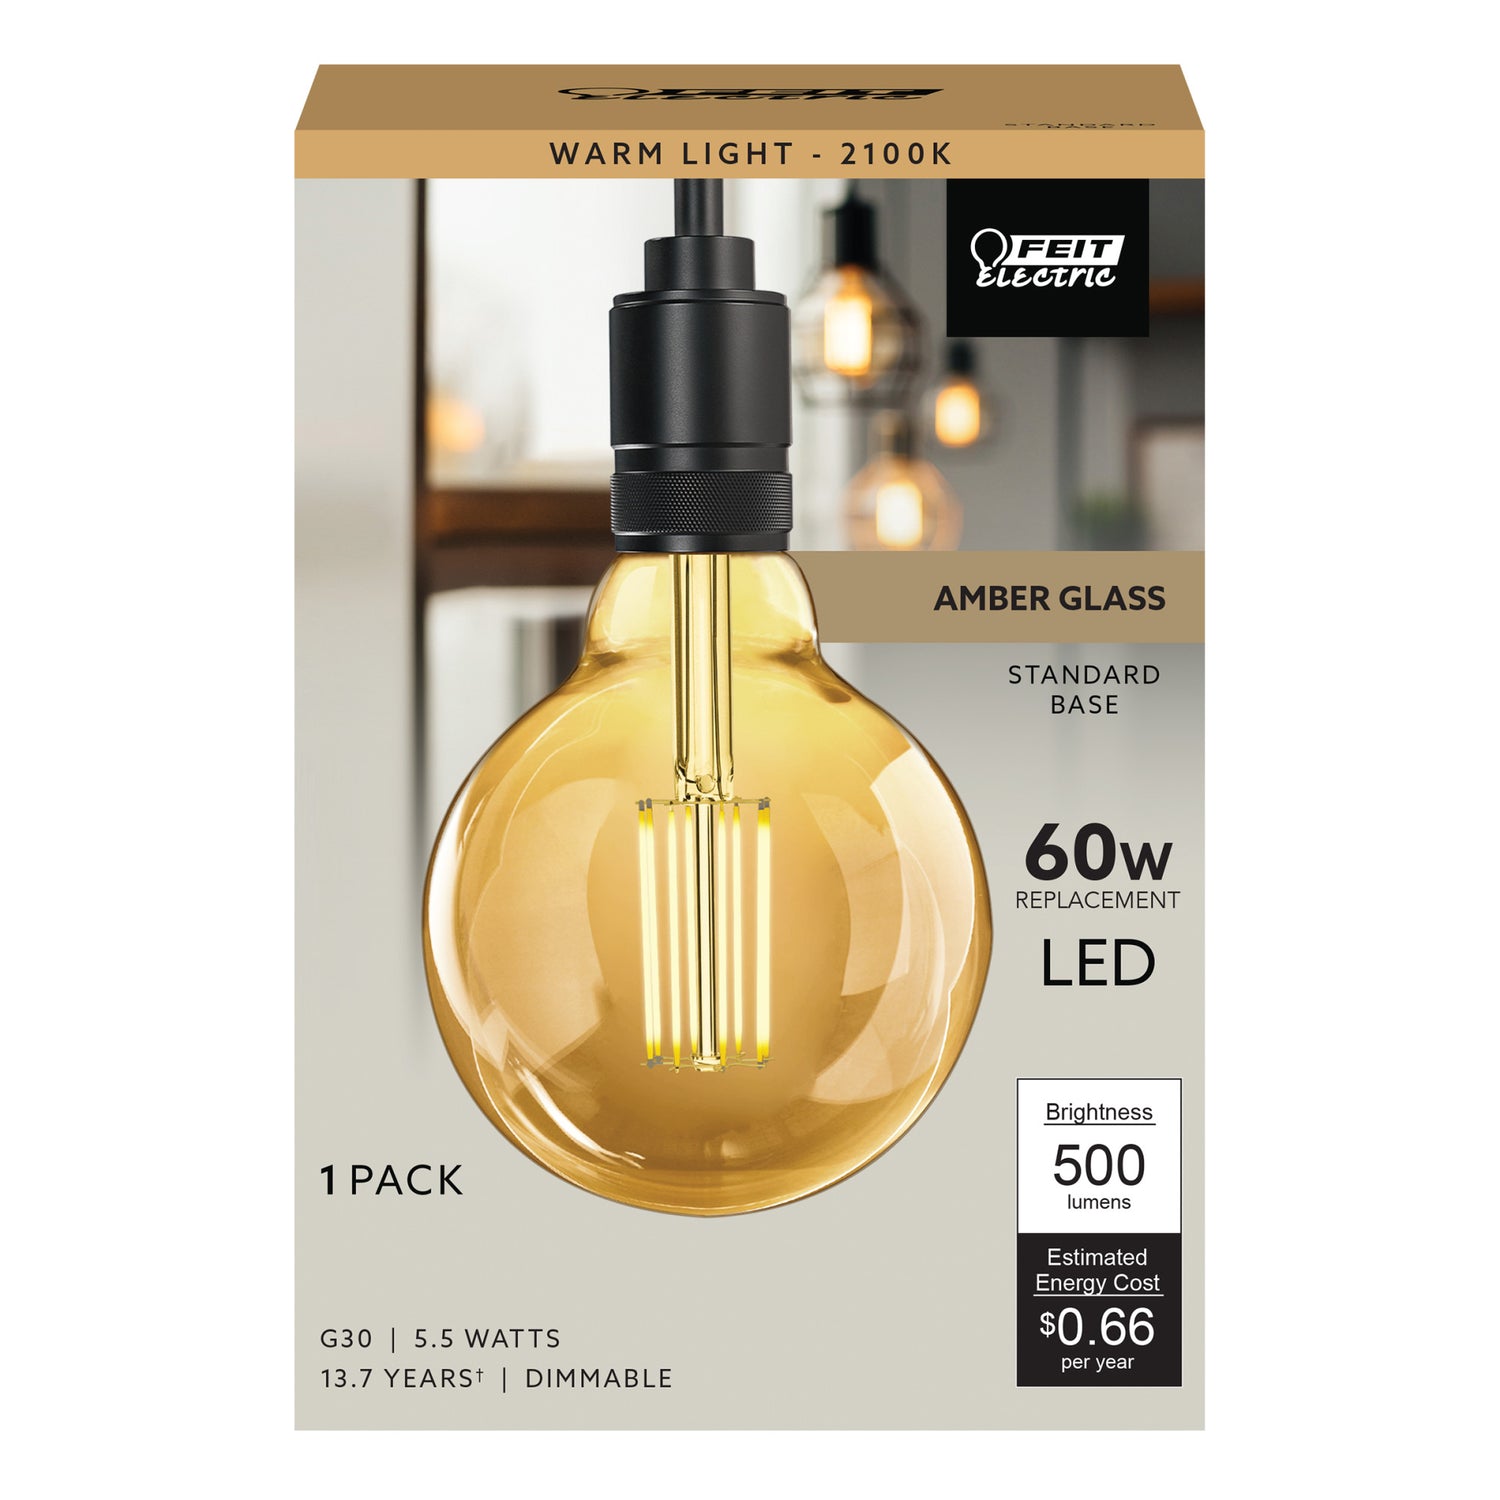 5.5W (60W Replacement) G30 E26 Cage Filament Amber Glass Vintage Edison LED Light Bulb, Warm Light